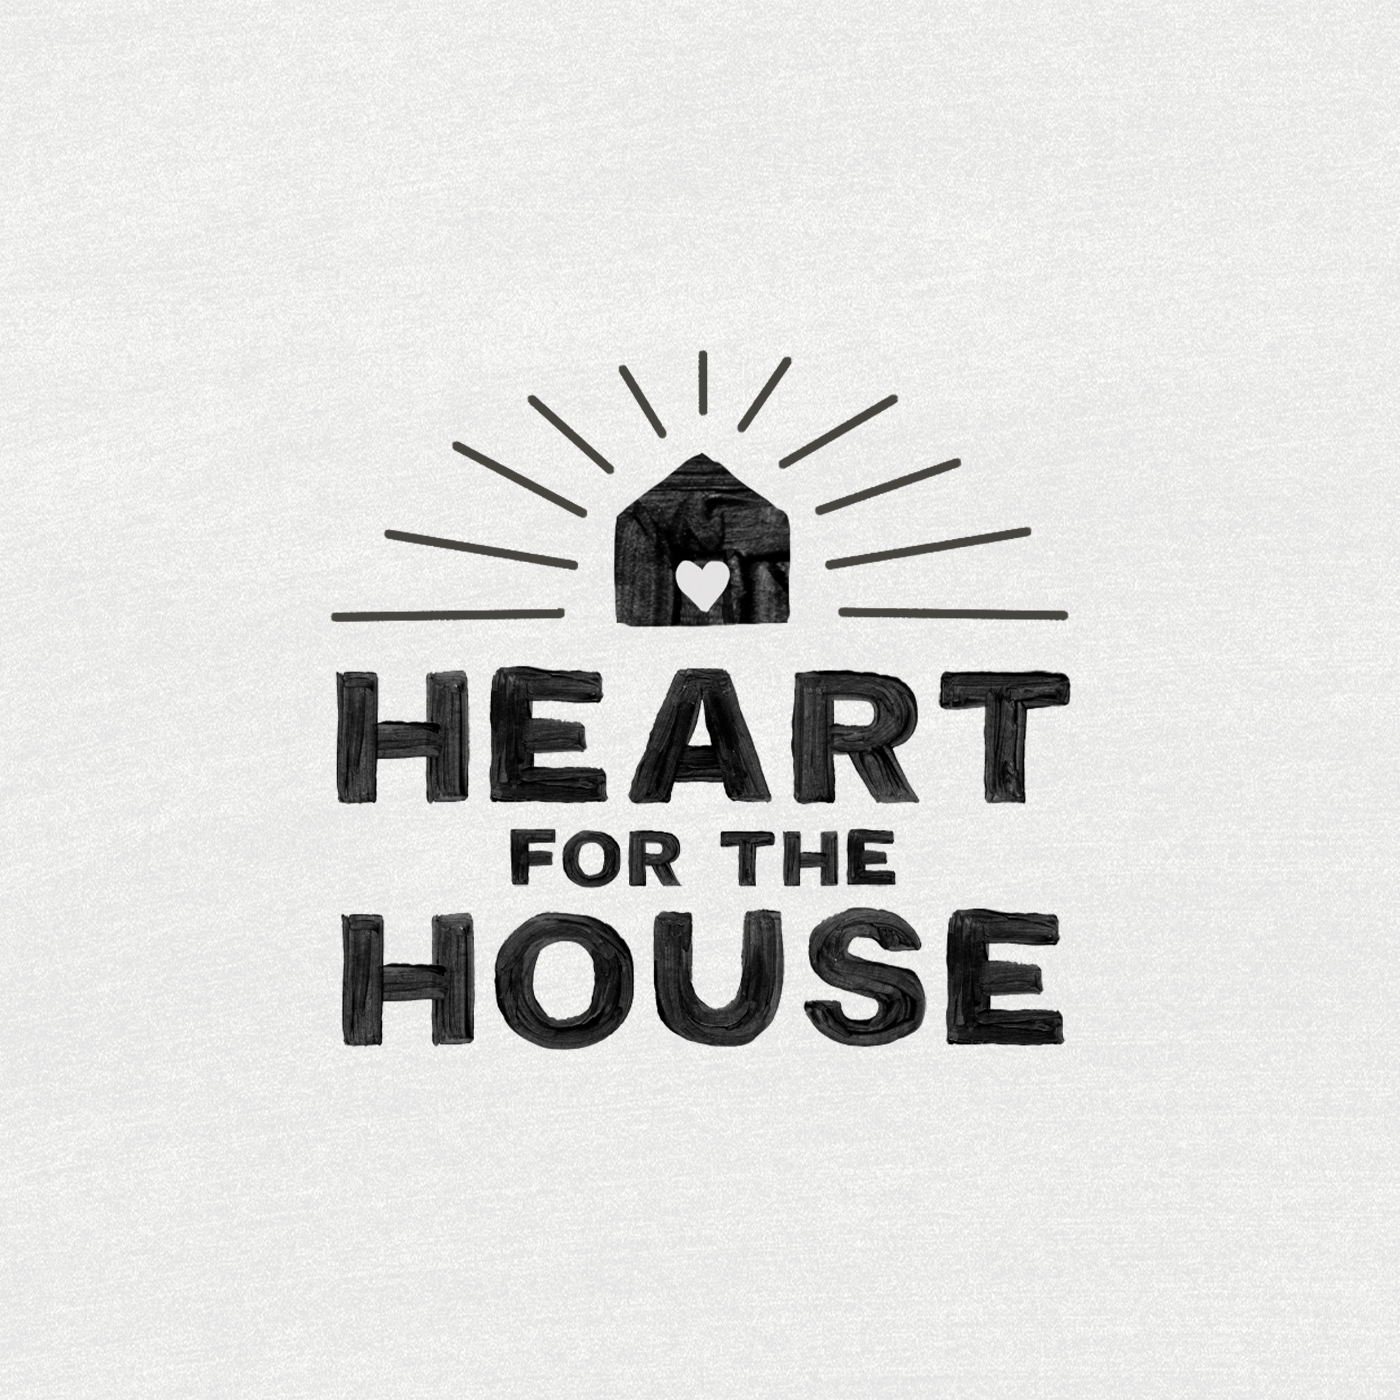 Heart for the House - Week 2